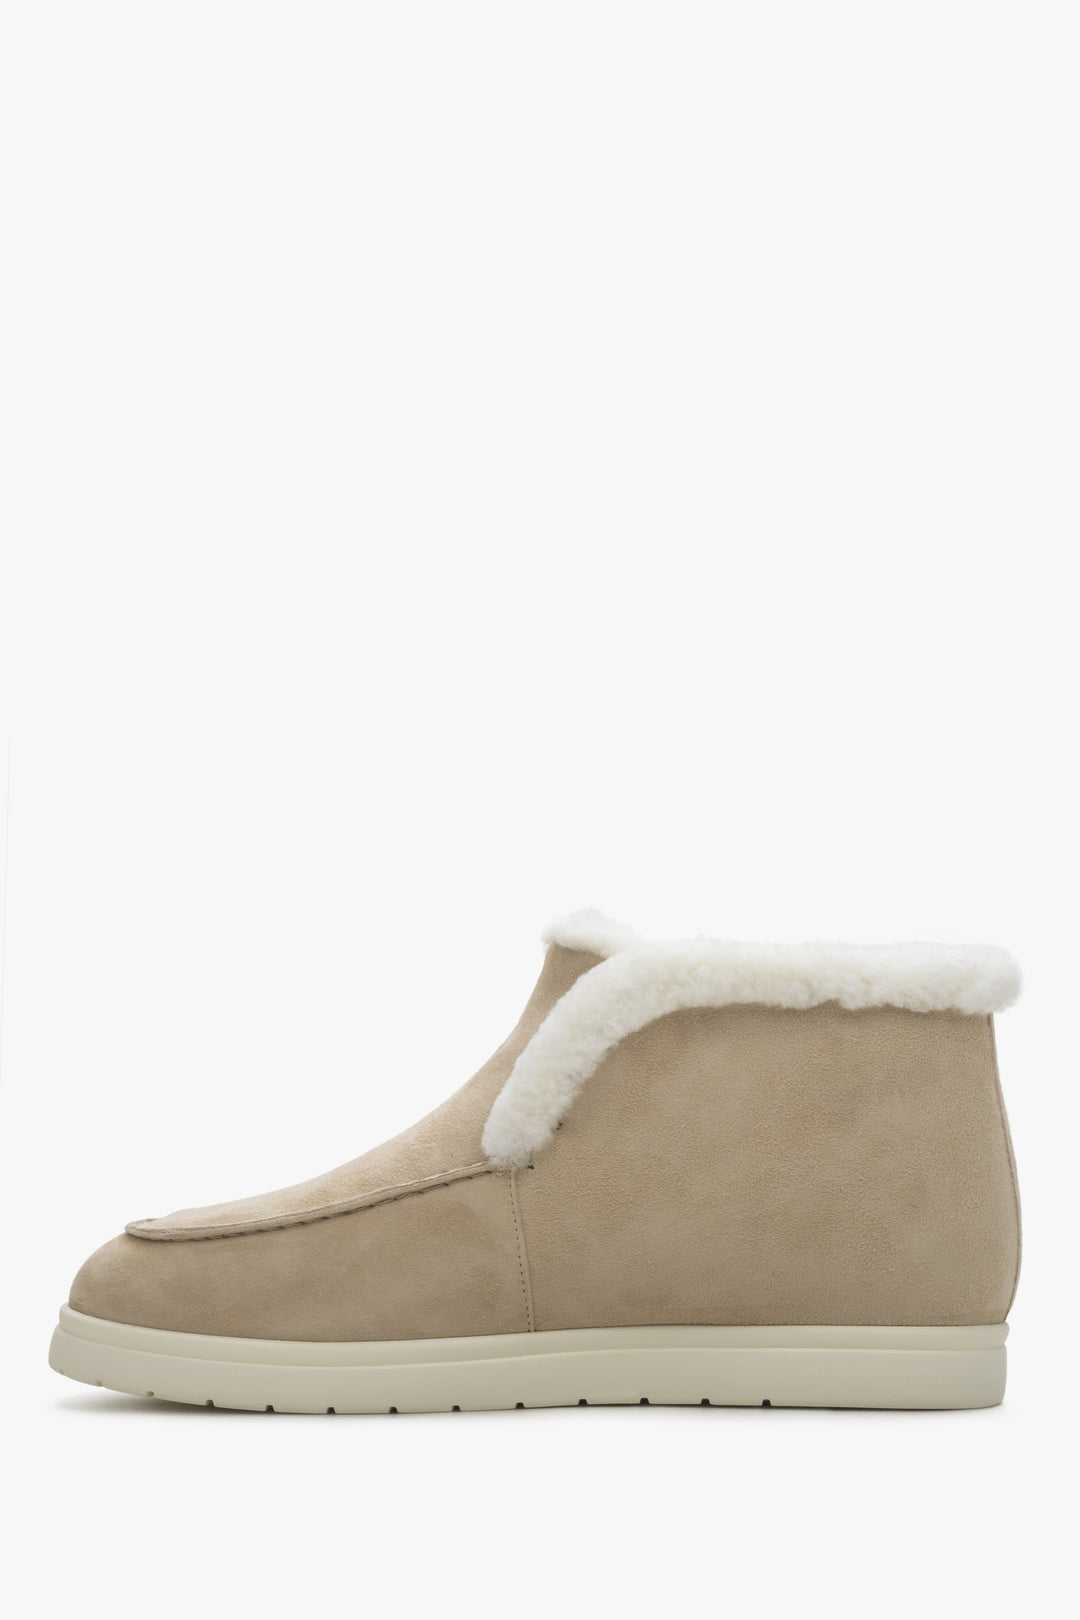 Women's low-top boots made of velour and fur in light beige colour Estro - shoe profile.